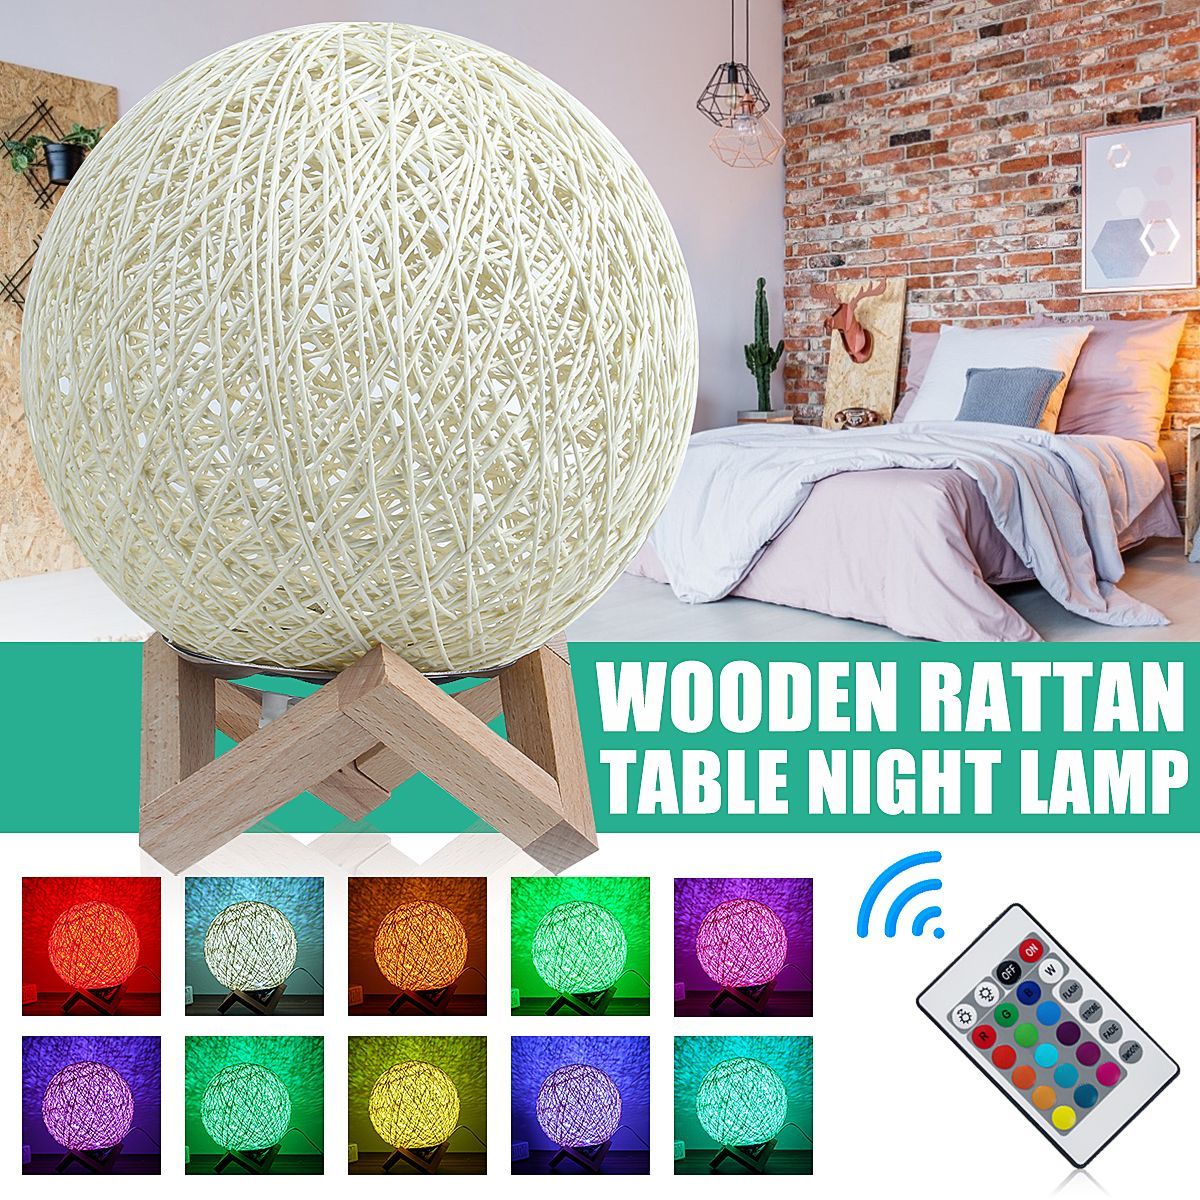 USB-Wooden-Rattan-Table-Light-Dimming-Desk-Bedroom-Night-LED-Ball-Home-Decorations-1627078